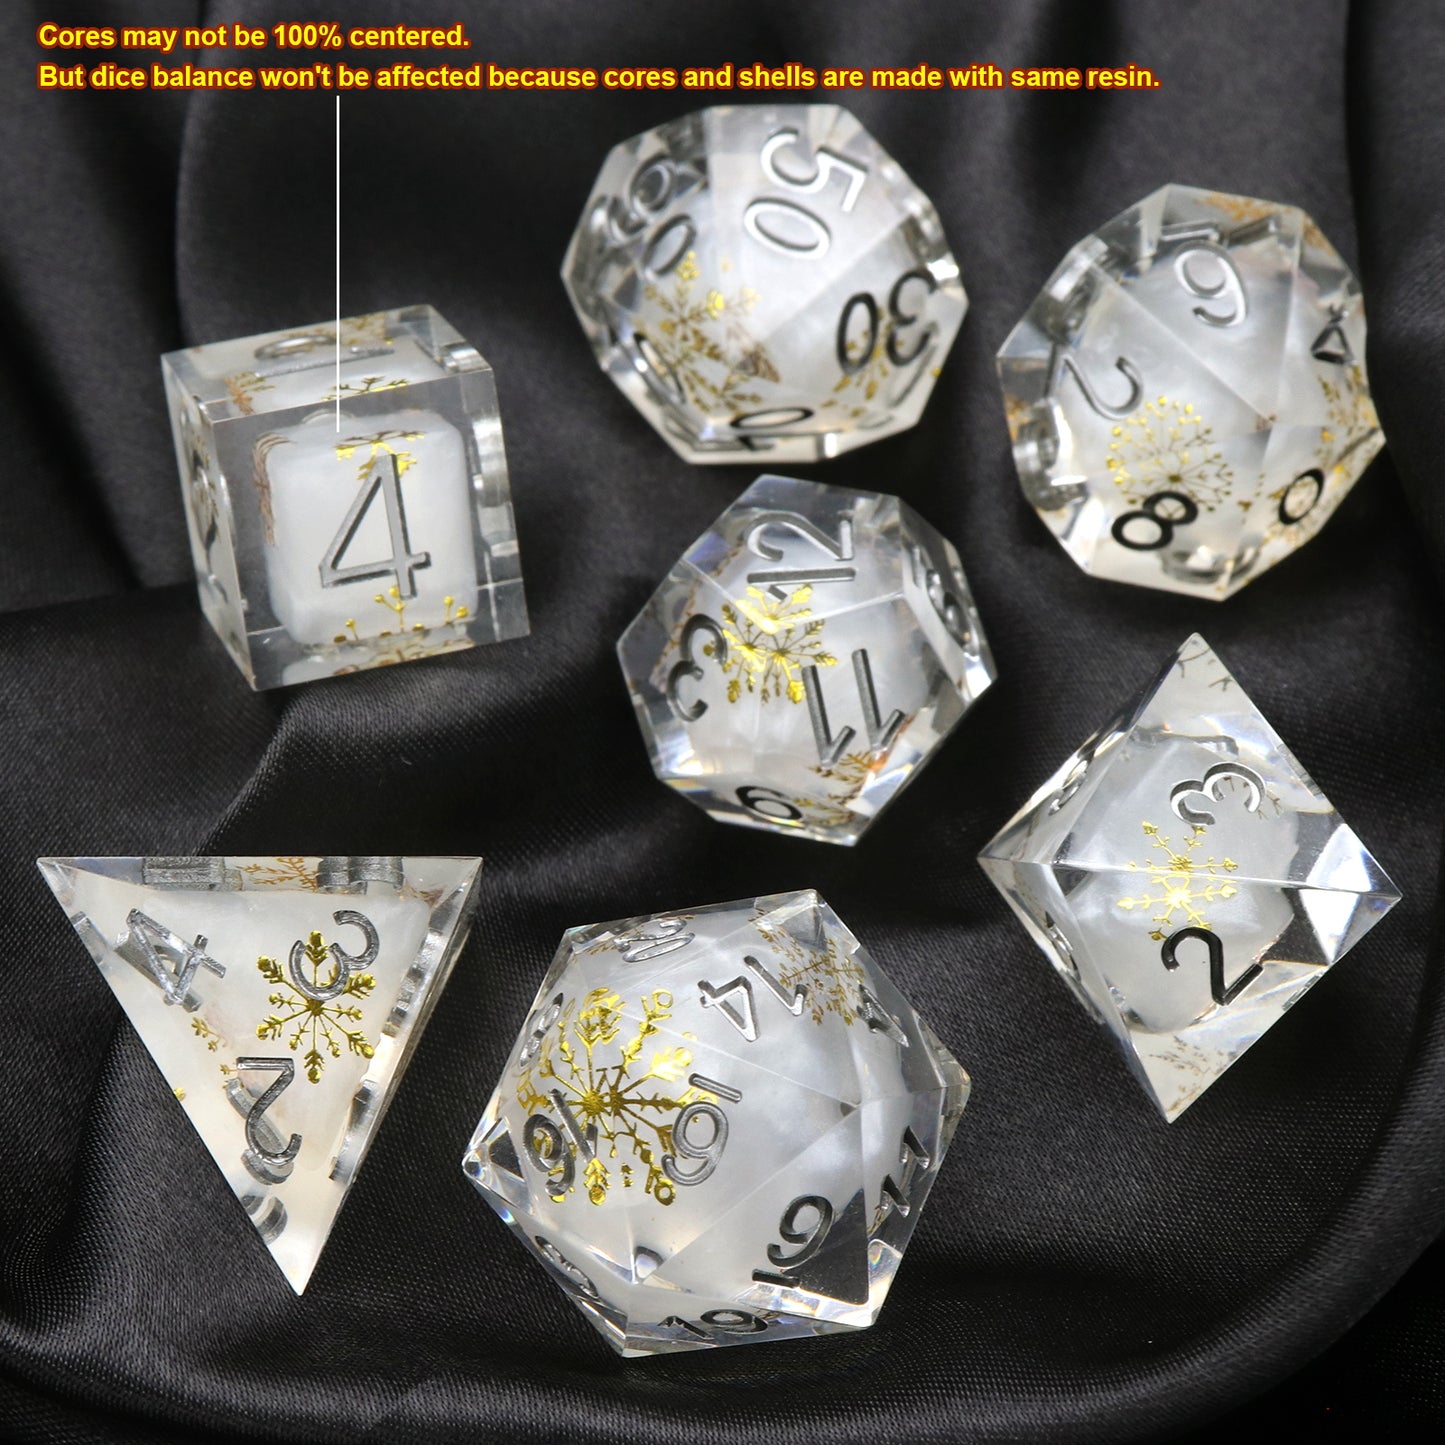 Haxtec Sharp Edge Dice Set Cute Gold Snow Flakes Christmas Resin DND Dice Set with Dice Case